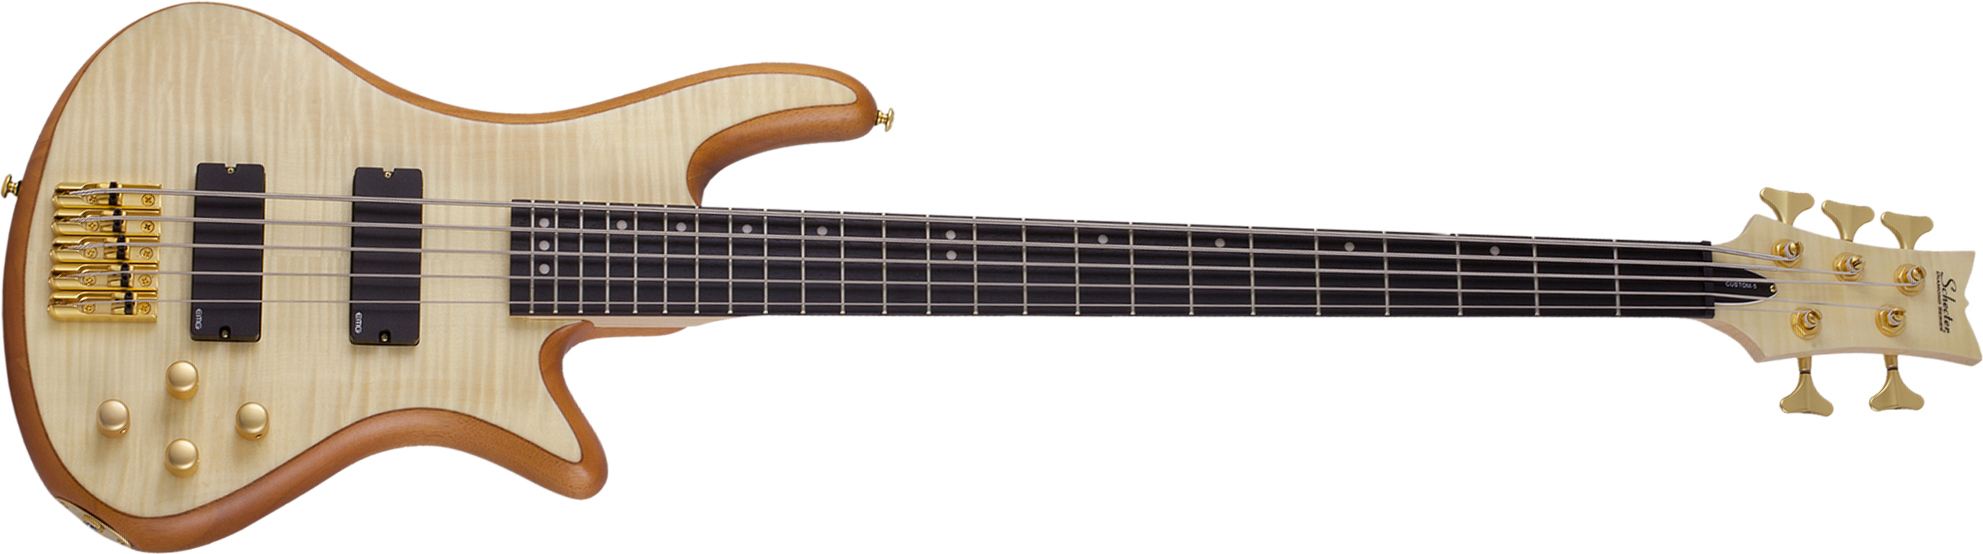 Schecter Stiletto Custom-5 5c Active Emg Rw - Natural Satin - Solid body electric bass - Main picture